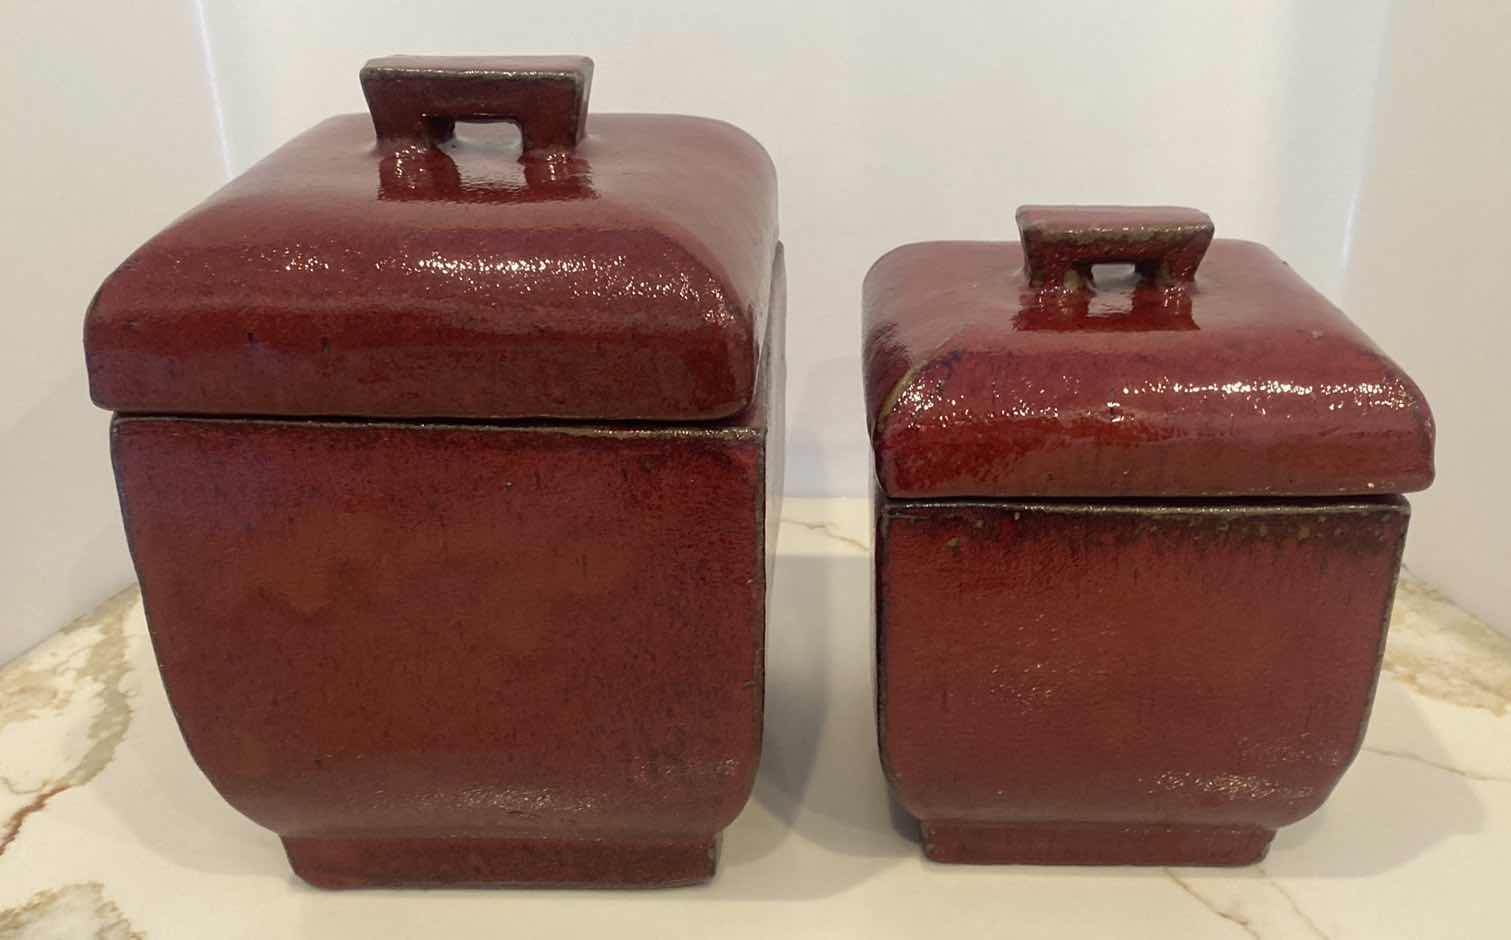 Photo 1 of RED CANISTERS (VERY HEAVY) LARGEST 8“ x 11 3/4”